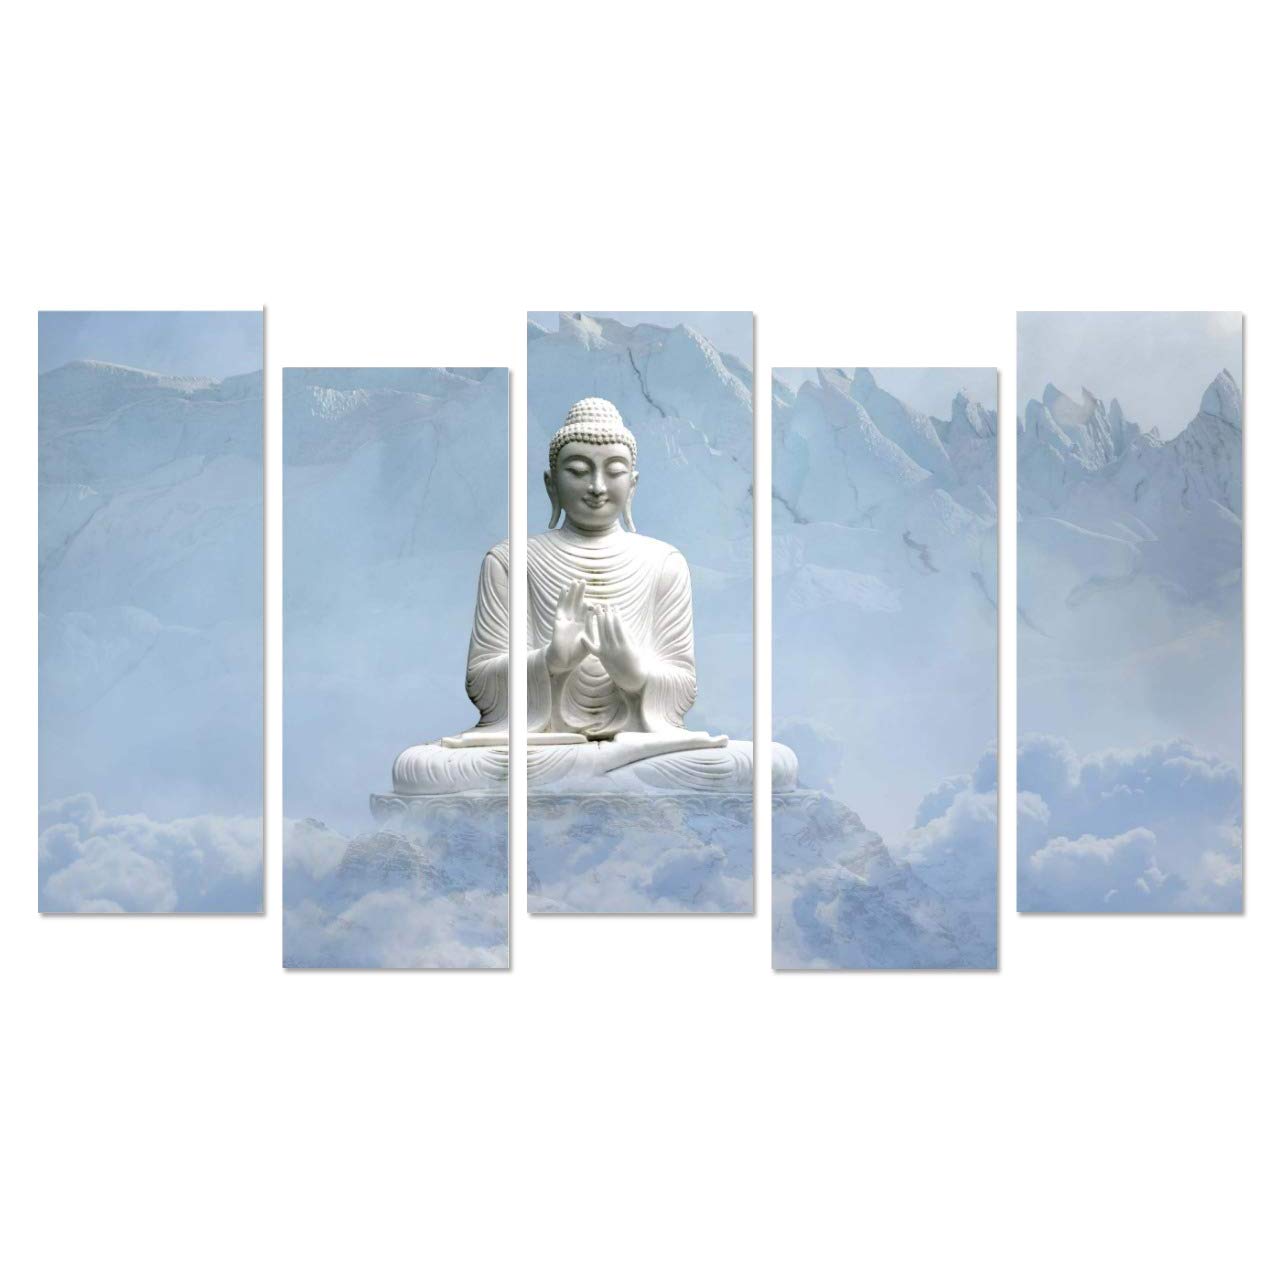 PAPER PLANE DESIGN Lord Buddha 5 Panels Wall Painting Art Reprints for Living Room Bedroom Hotel Office (Sun-Board, Size-27 x 50 inches, 5 Panels)